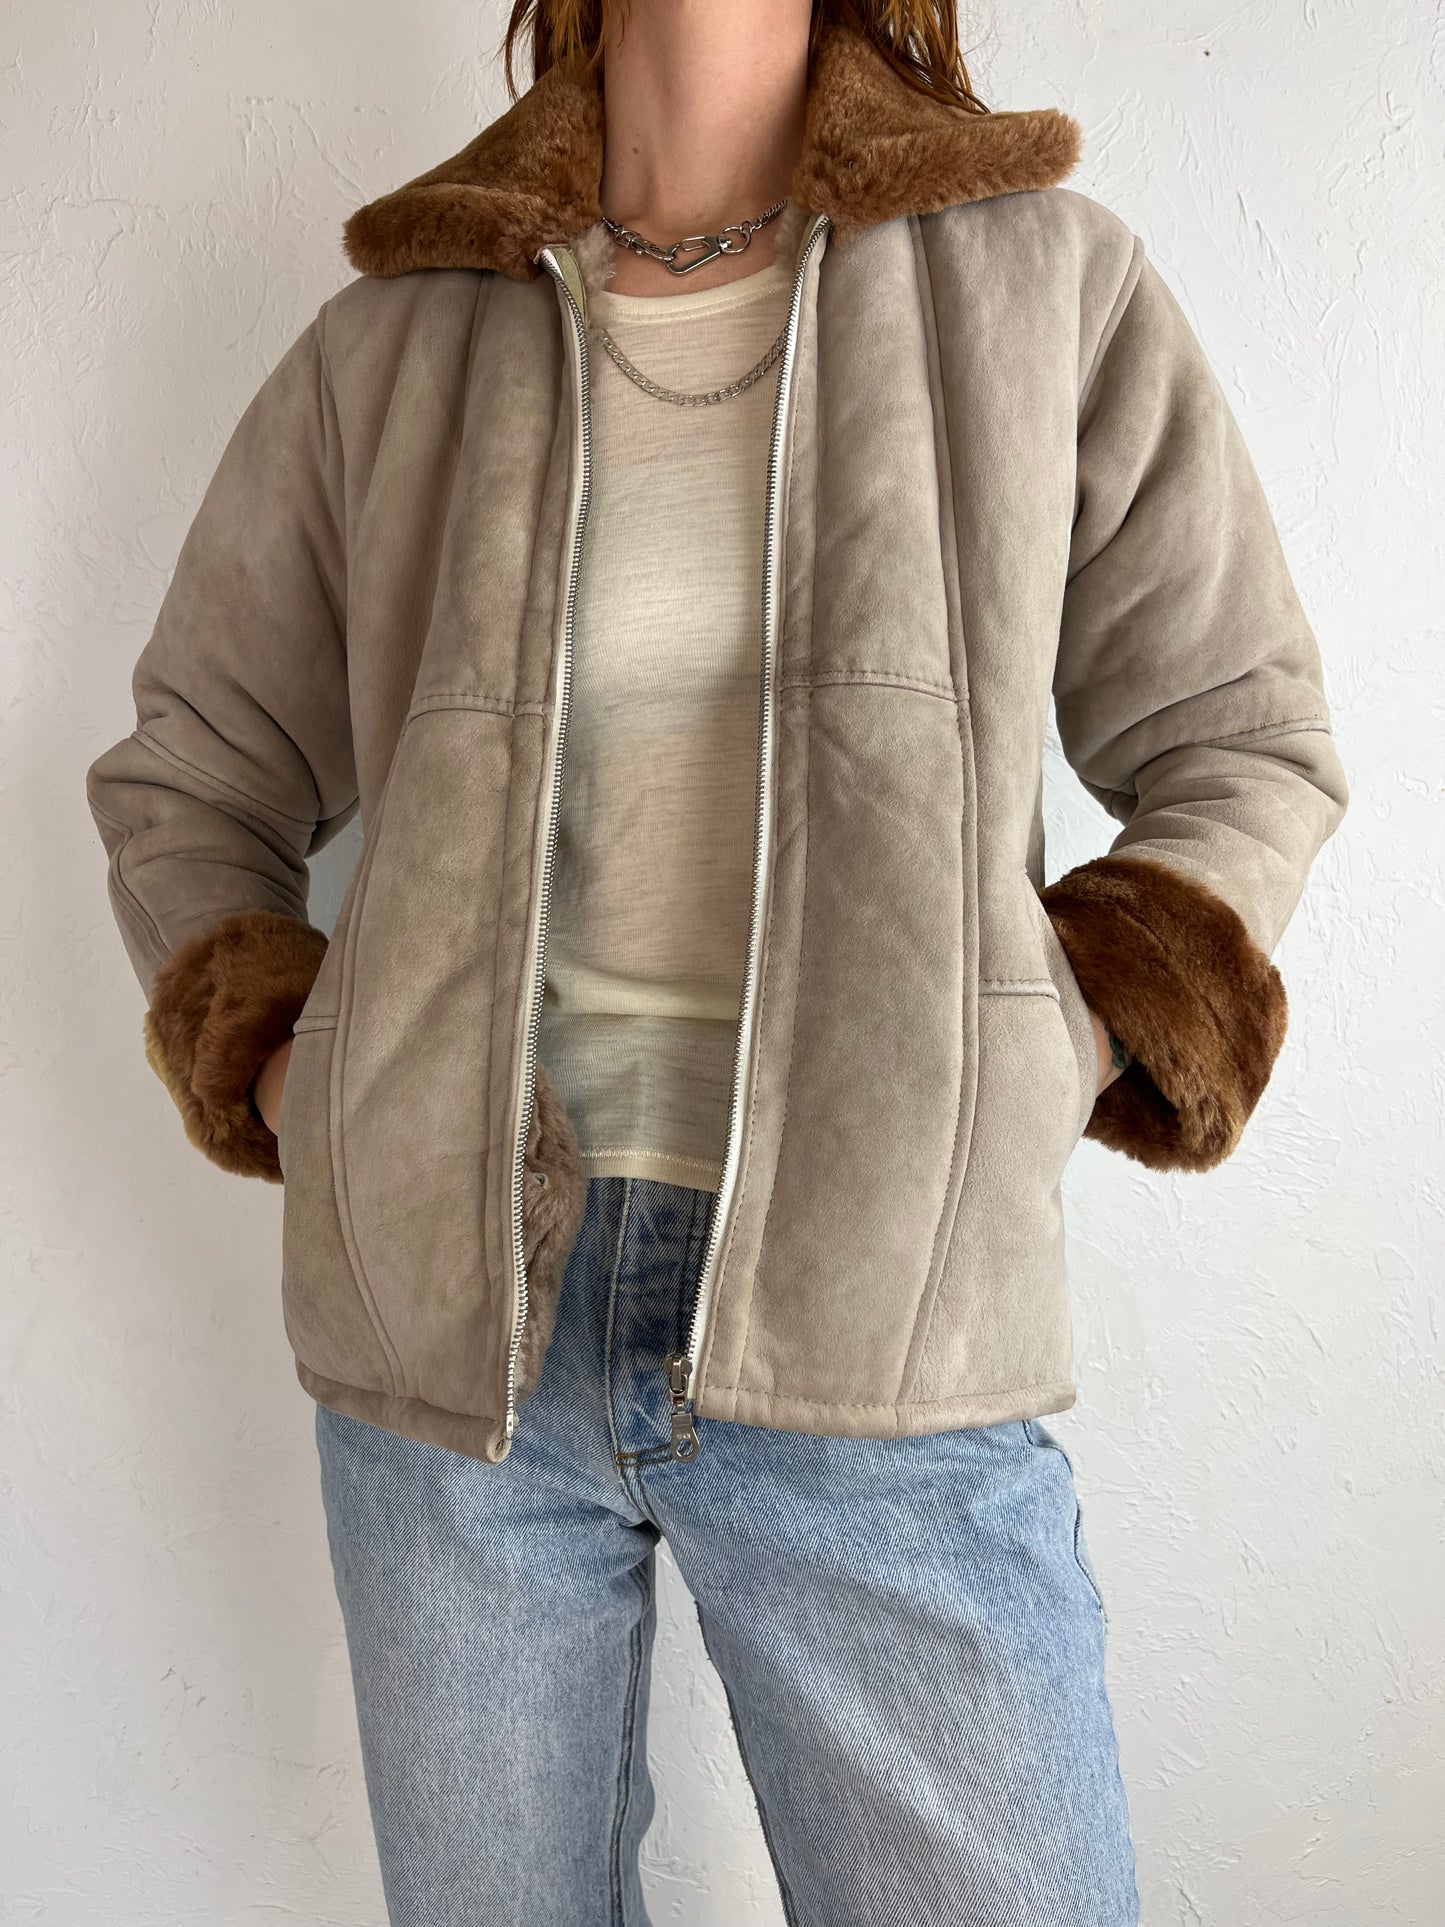 90s Handmade Suede Shearling Jacket / XS